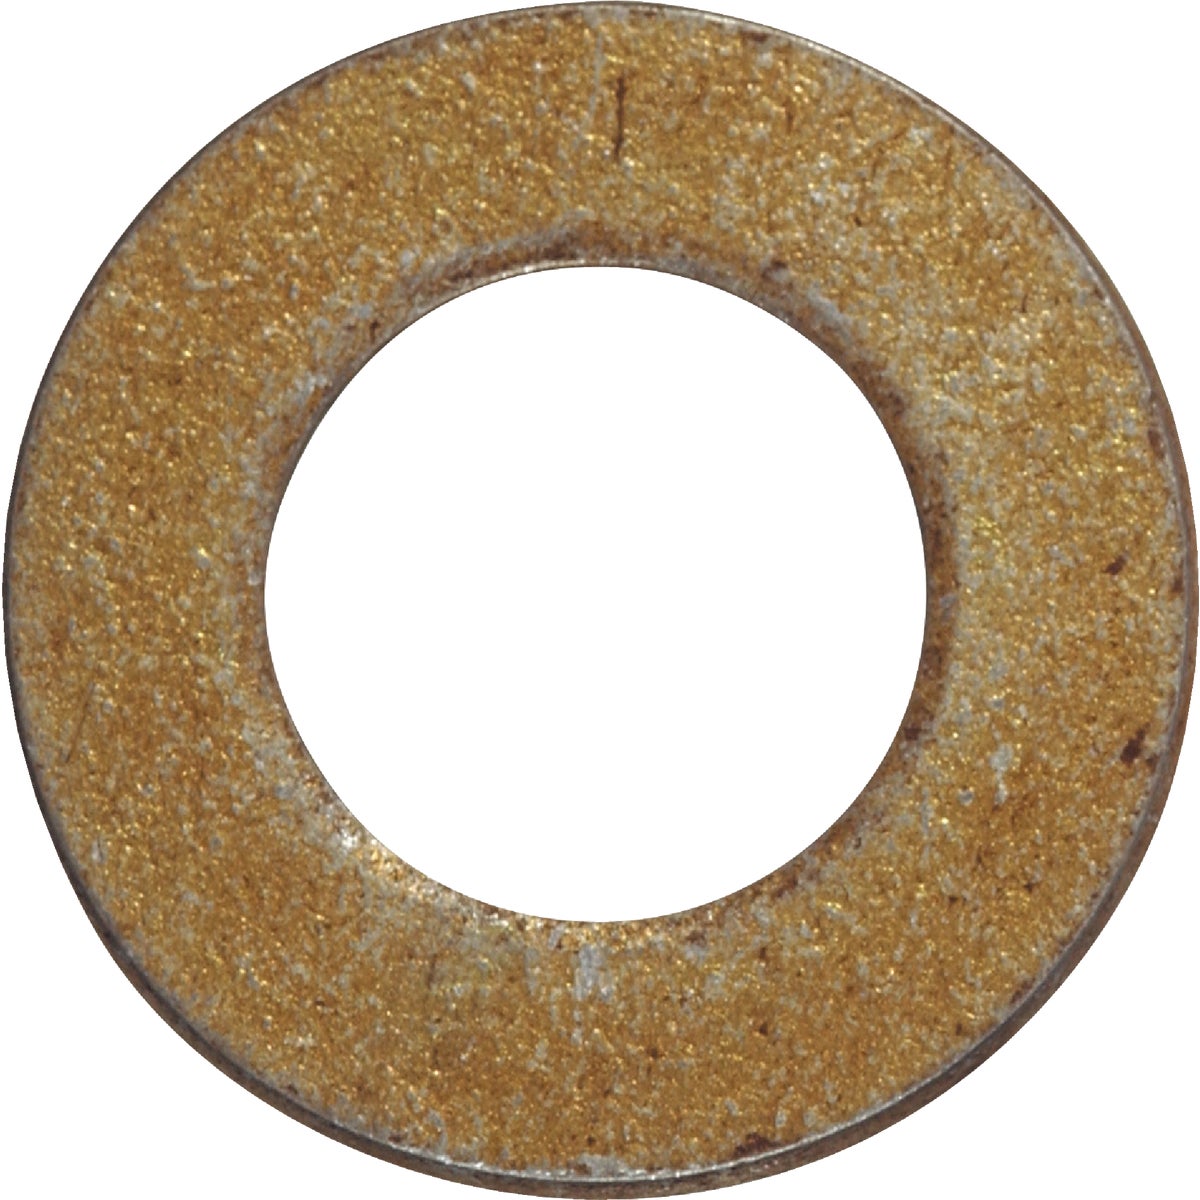 Item 765923, Hardened, yellow dichromate flat washer is used to spread the load of a 